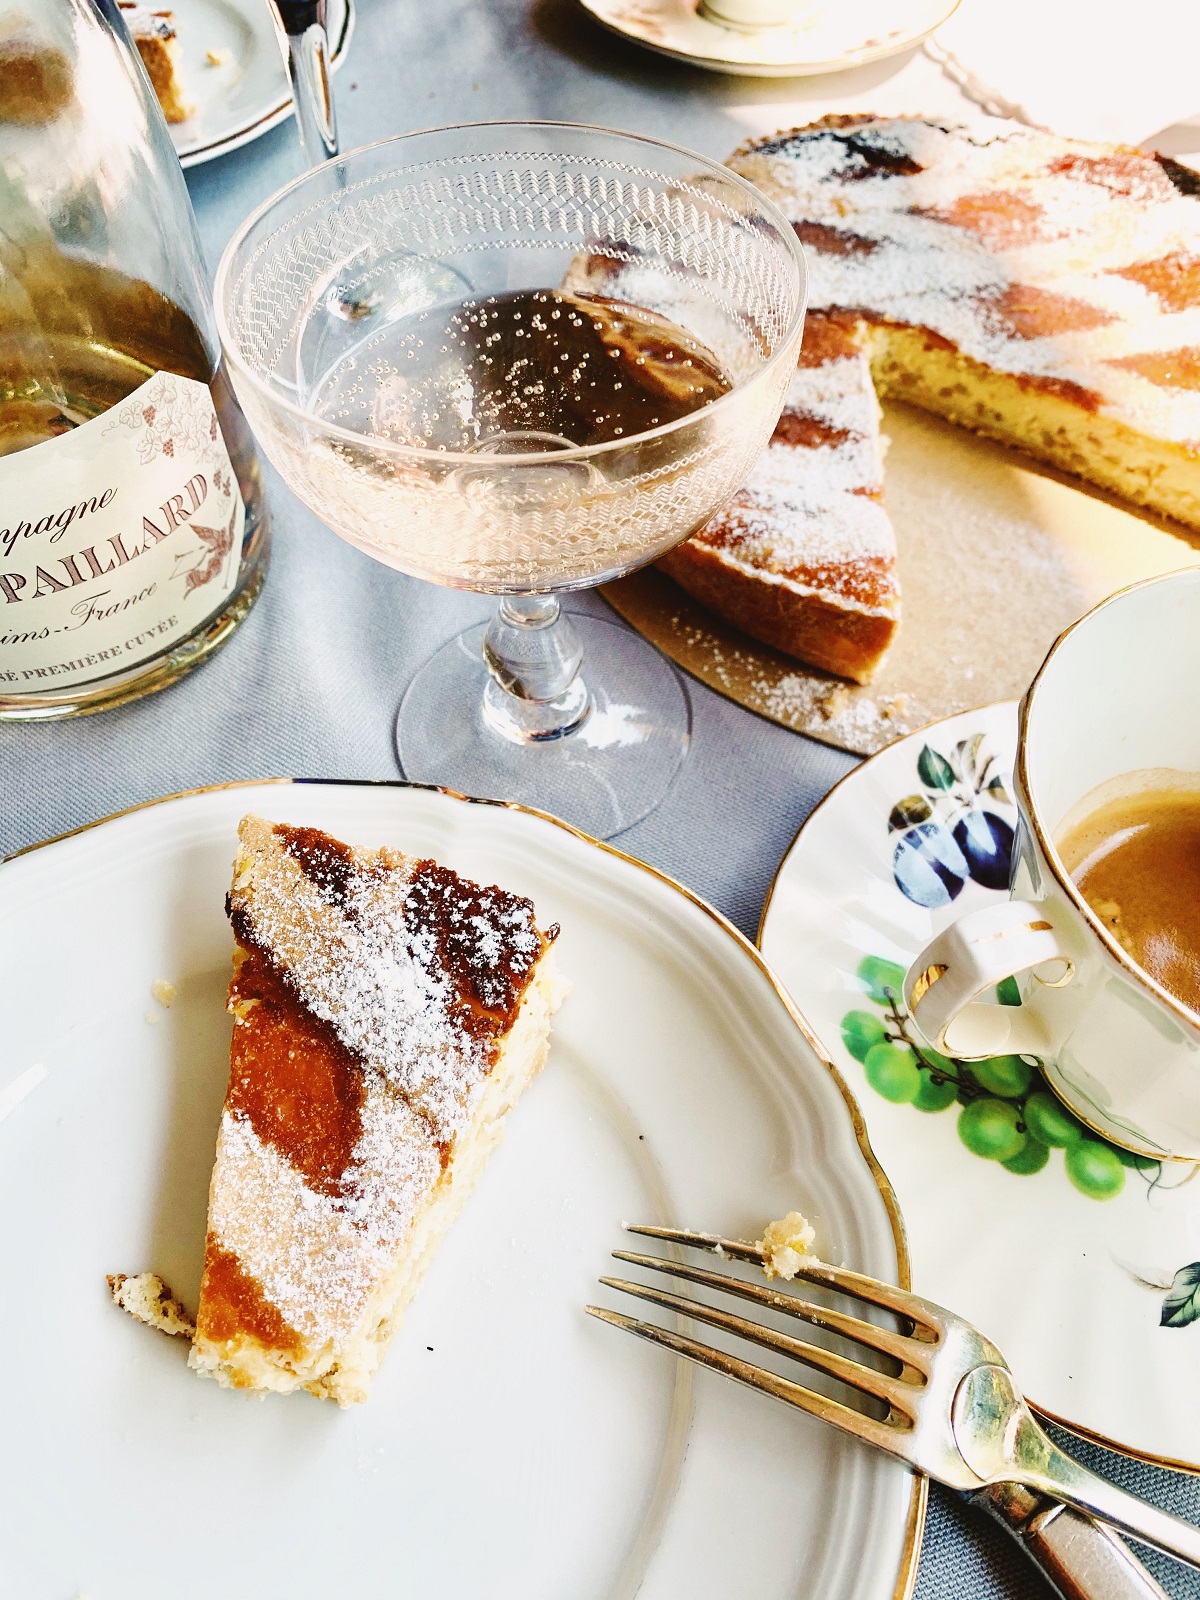 Dessert spread with sparkling wine, tea, and apricot tart